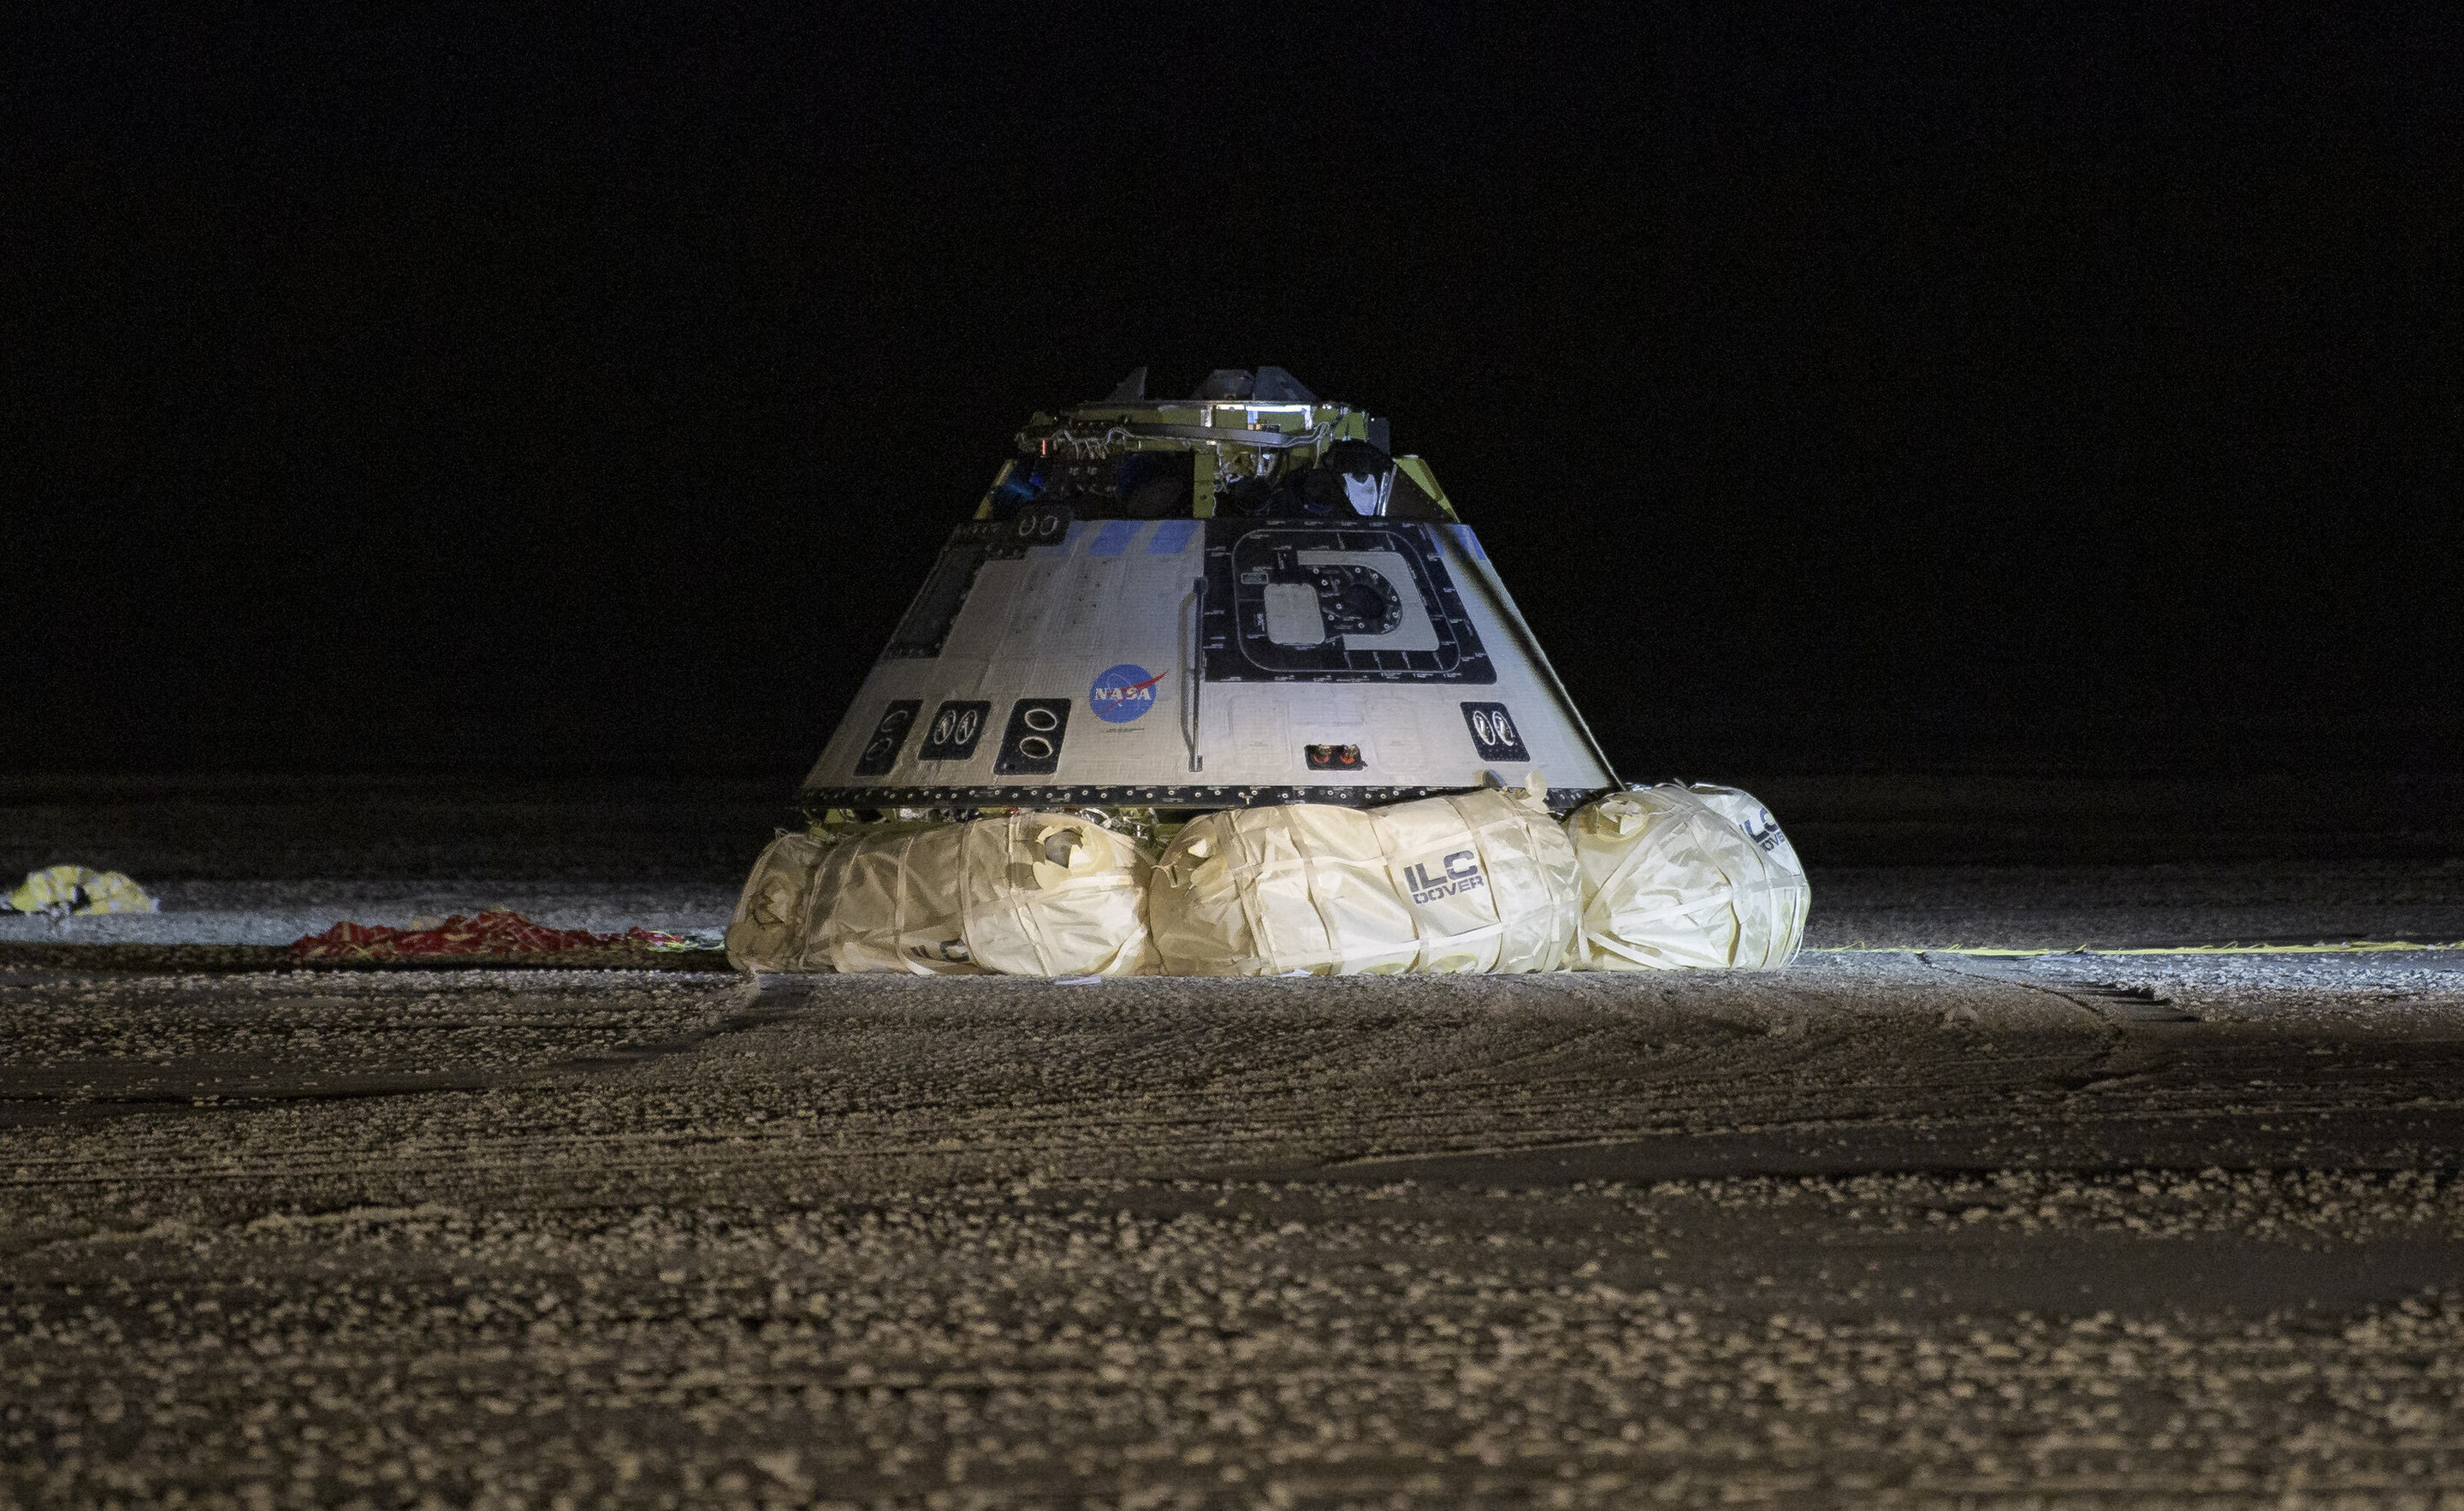 Boeing capsule returns to Earth after aborted space mission (Update) image